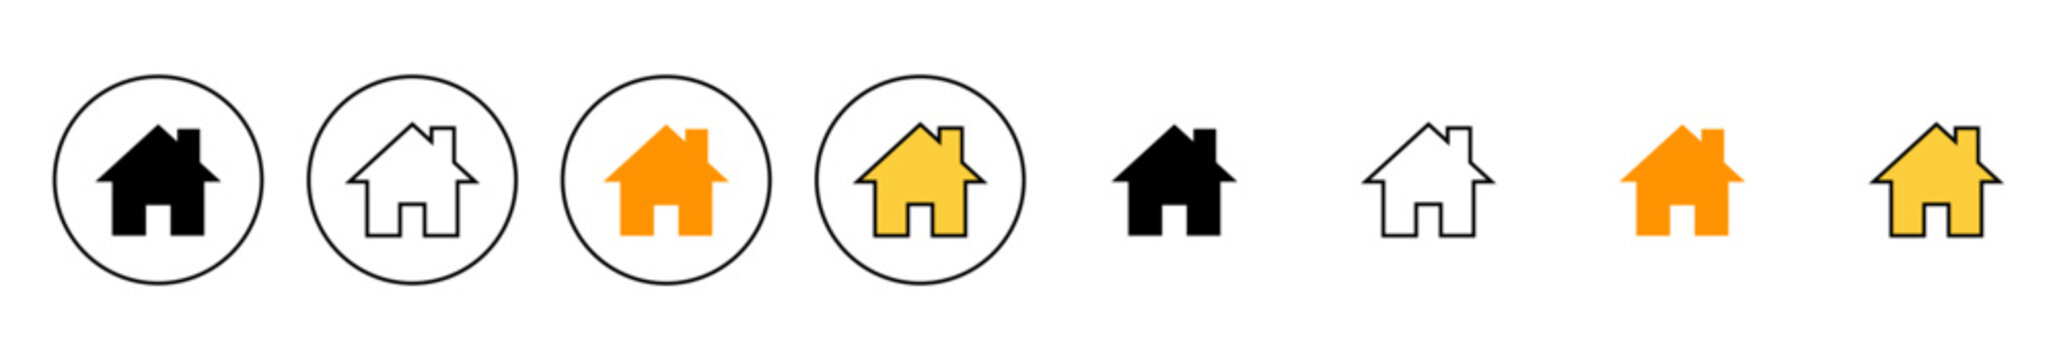 House icon set vector. Home sign and symbol